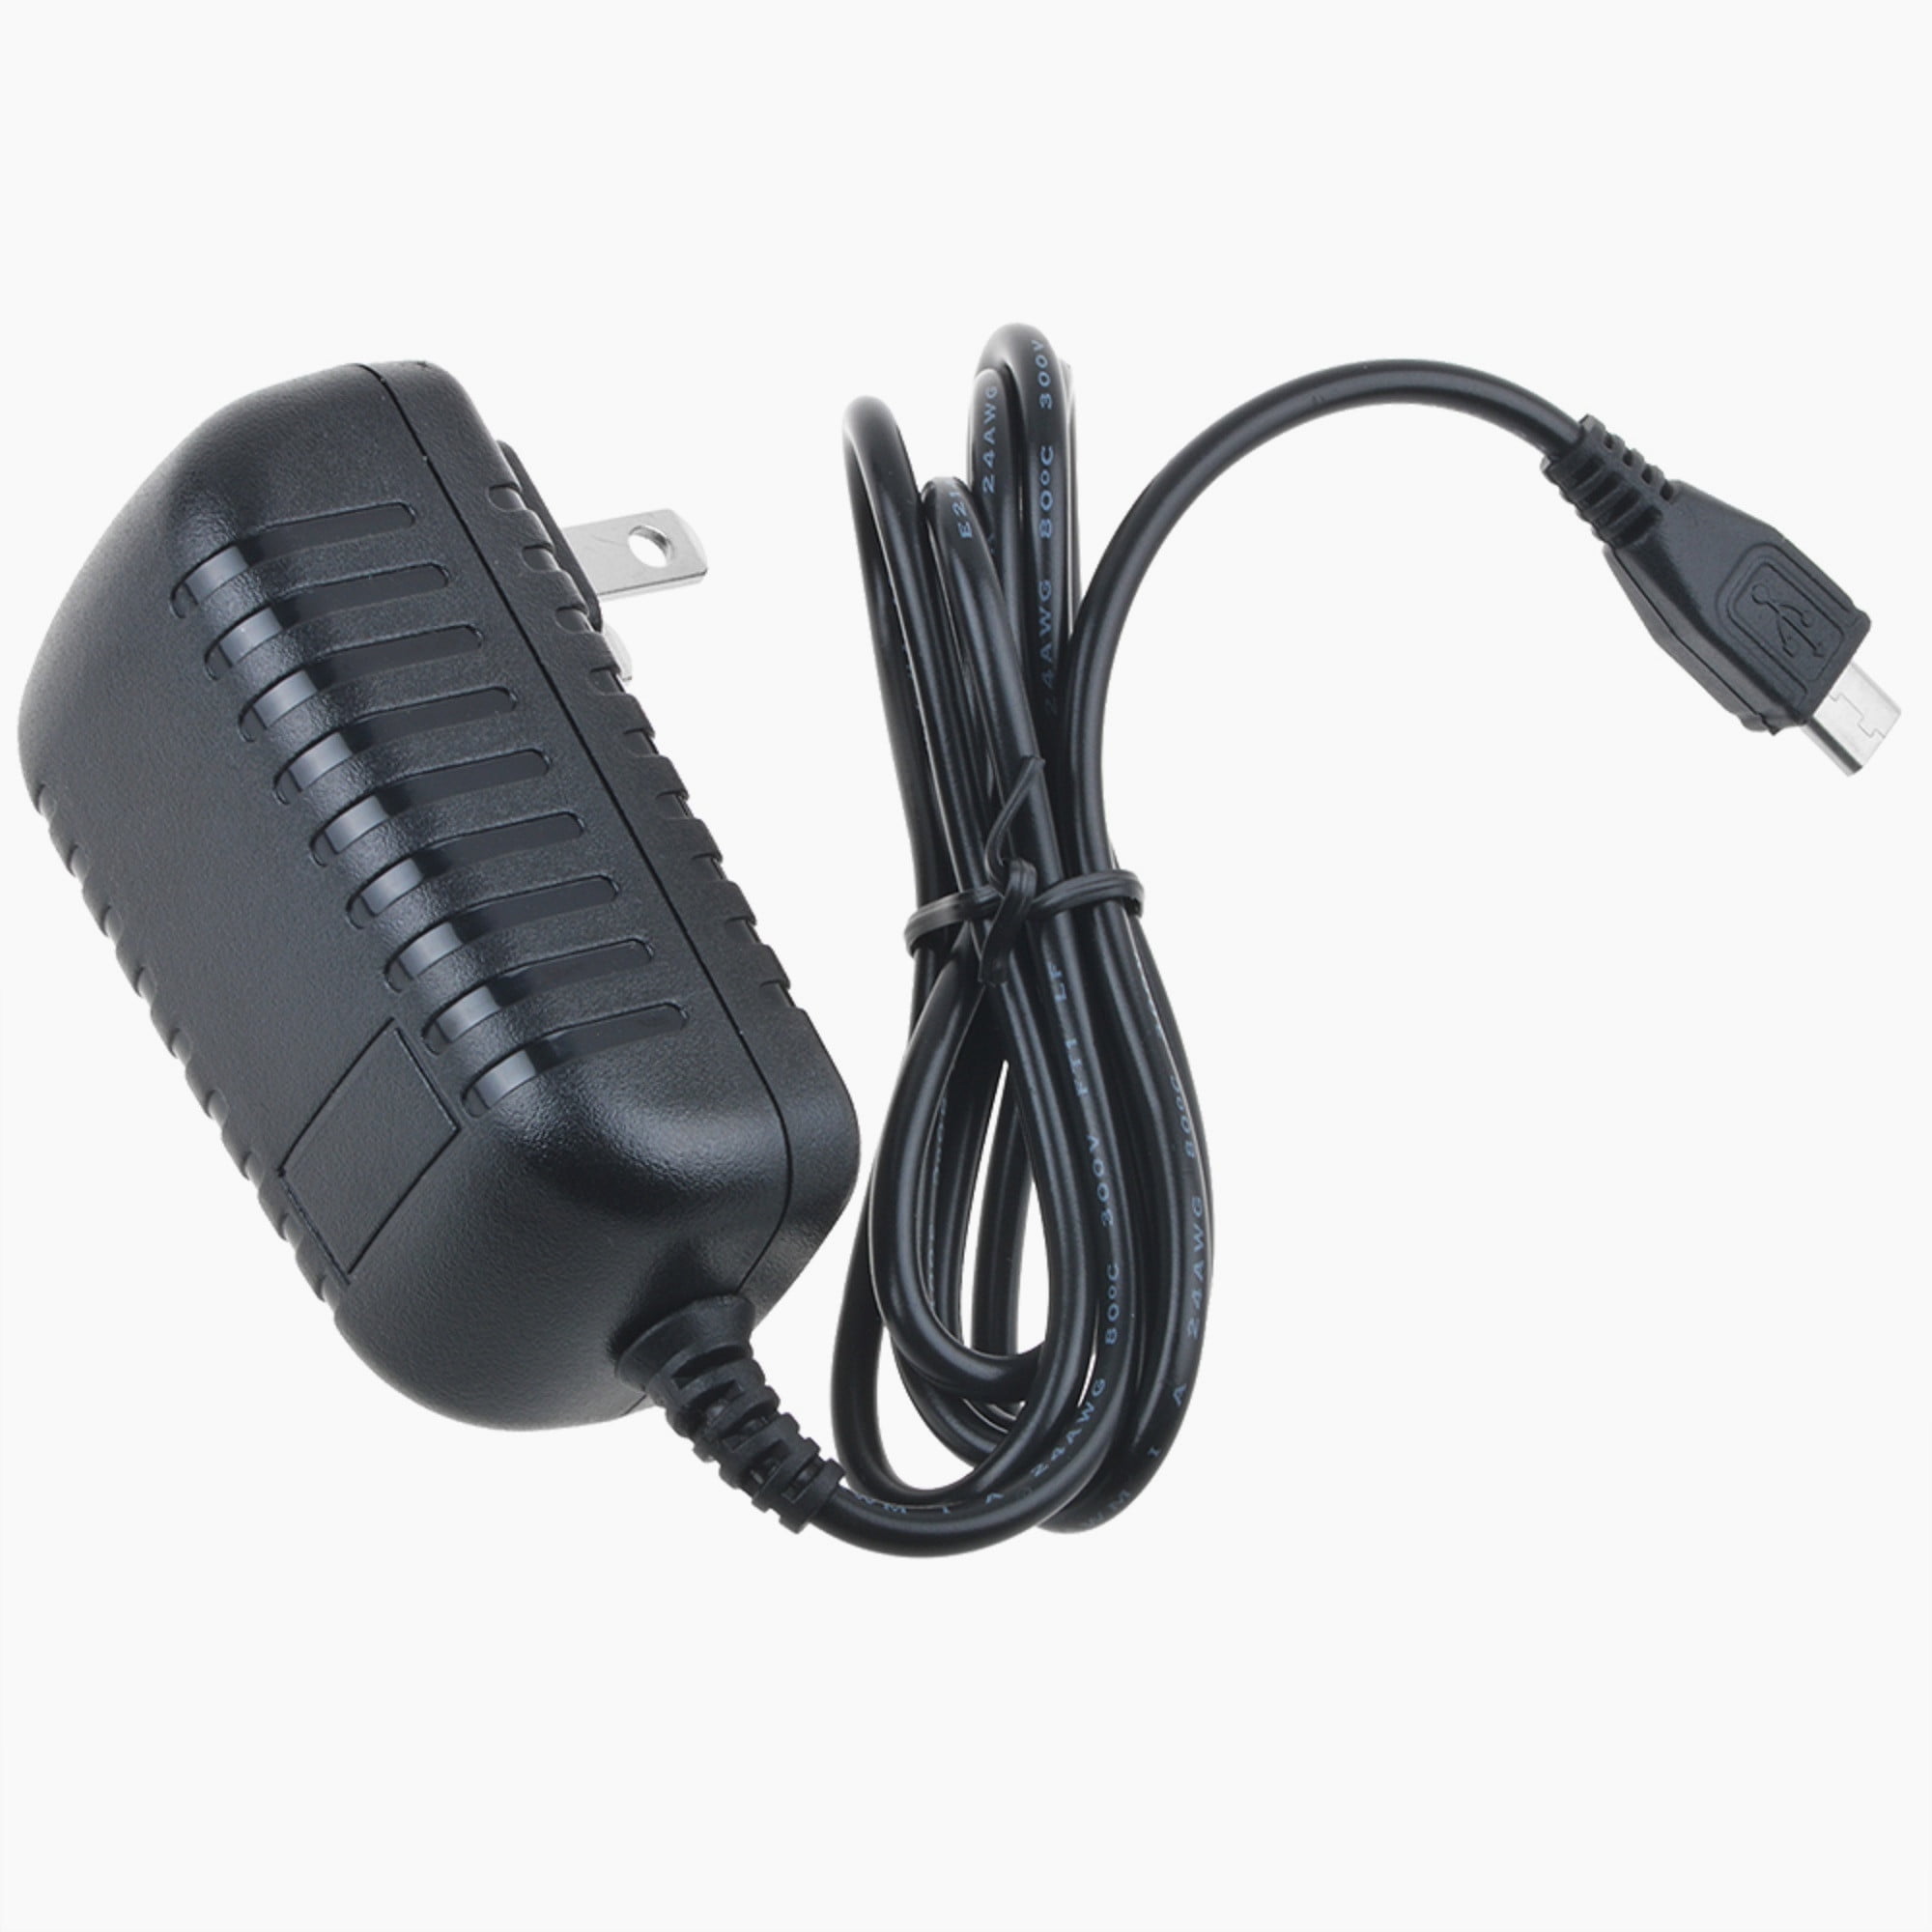 Power Supply for the UE Wonderboom Bluetooth Speaker Mains Charger 